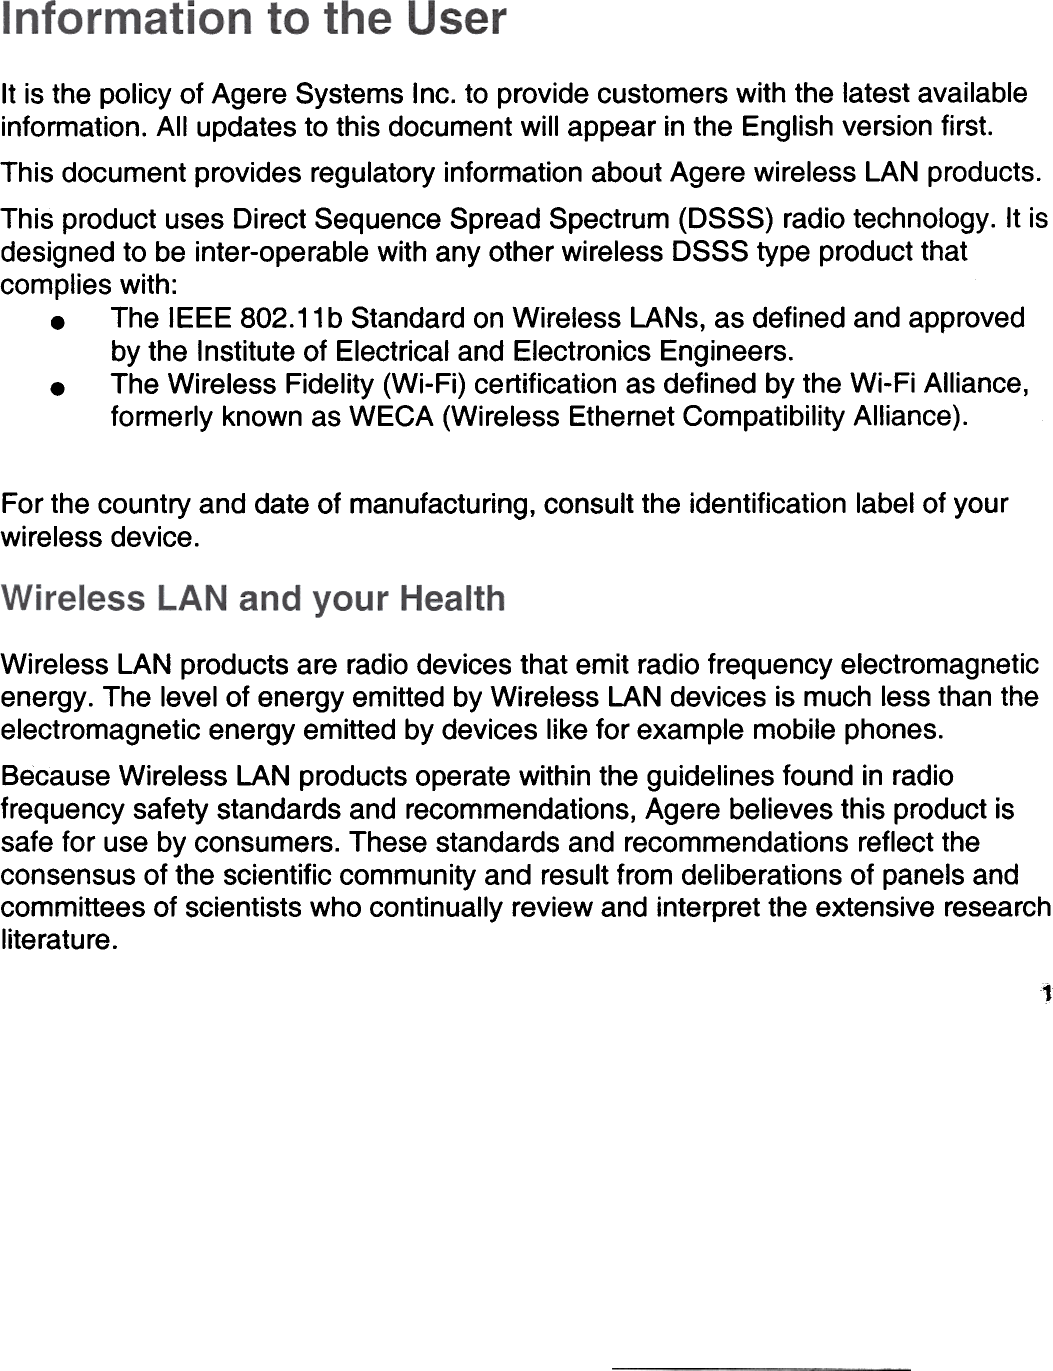 It is the policy of Agere  Systems  Inc. to provide customers  with the Iatest availableinformation.  AII updates to this document  will appear  in the English version first.This document  provides  regulatory  information  about Agere wireless  LAN products.This product  uses Direct Sequence  Spread Spectrum (DSSS)  radio technology.  It isdesigned  to be inter-operable  with any other wireless  DSSS type  product thatcomplies  with:.  The  IEEE 802.11 b Standard  on Wireless  LANs, as defined  and approvedby the  Institute of Electrical  and Electronics  Engineers..  The Wireless  Fidelity  (Wi-Fi) certification  as defined  by the Wi-Fi Alliance,formerly  known as WECA  (Wireless  Ethernet Compatibility  Alliance).For the country  and date of manufacturing,  consult  the identification  label of yourwireless  device.Wireless  LAN products  are radio devices that emit radio frequency  electromagneticenergy. The  level of energy emitted  by Wireless  LAN devices  is much less than theelectromagnetic  energy emitted  by devices  like for example  mobile phones.Because Wireless  LAN products  operate  within the guidelines  found  in radiofrequency  safety  standards  and recommendations,  Agere  believes  this product issafe for use by consumers.  These standards  and recommendations  reflect theconsensus  of the scientific  community  and result from deliberations  of panels andcommittees  of scientists  who continually  review and interpret the extensive  researchliterature.1